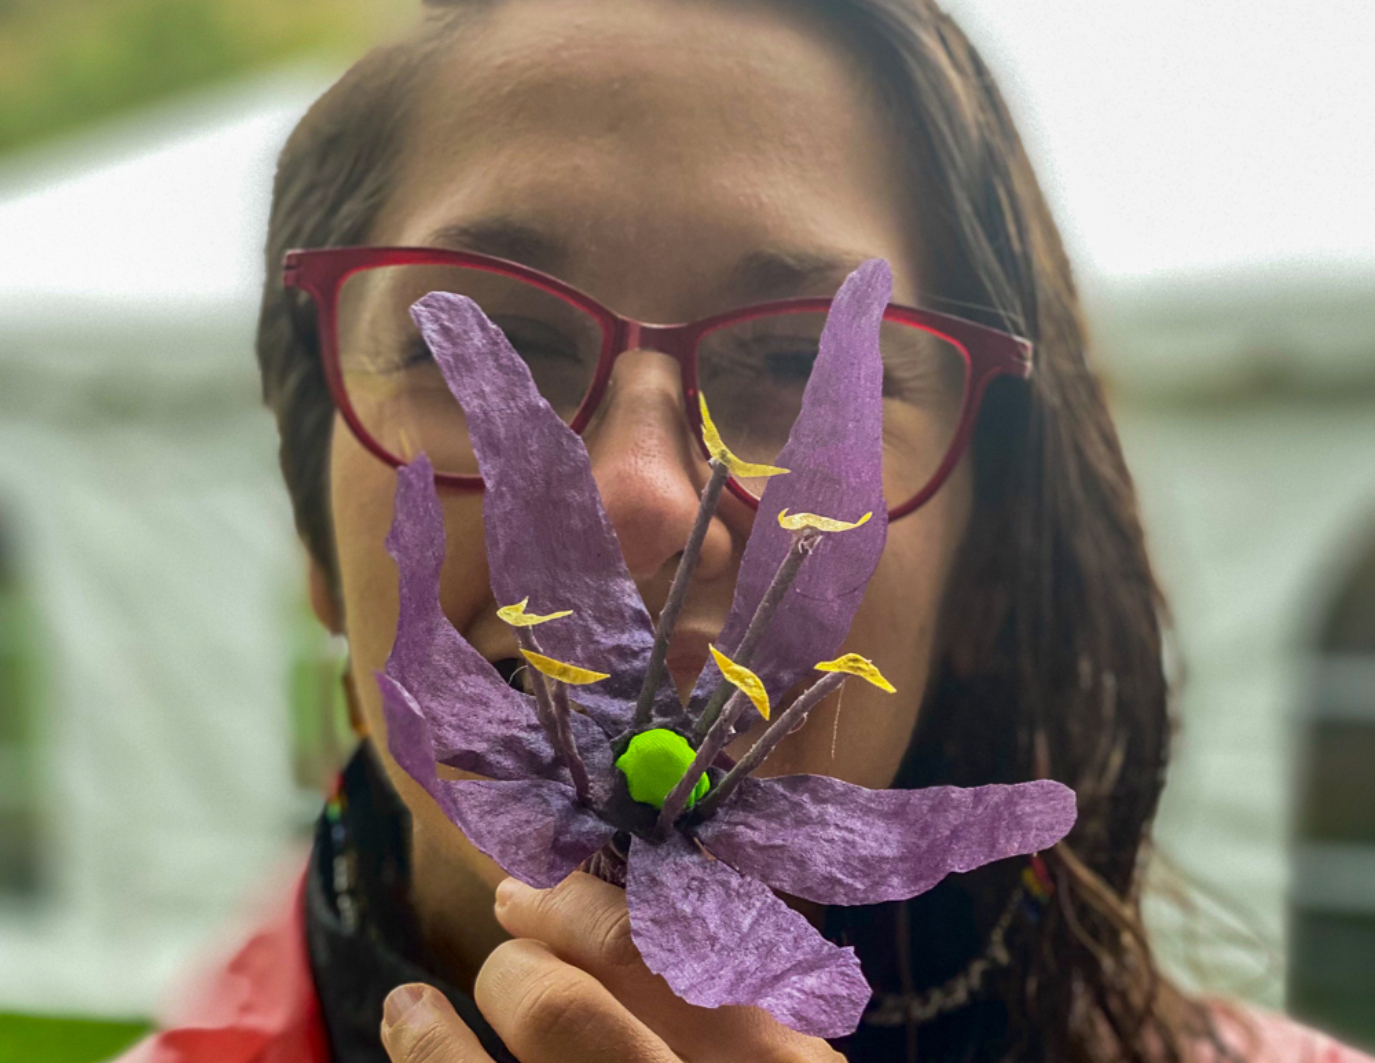 The artist, Marina, holds up in front of her face, the first completed Camas flower, a collaborative effort of hand dyeing and transport. There are six purple petals and a green knob in the middle, with several stamen with yellow flowers on them. Her face is in the background and she is smiling.